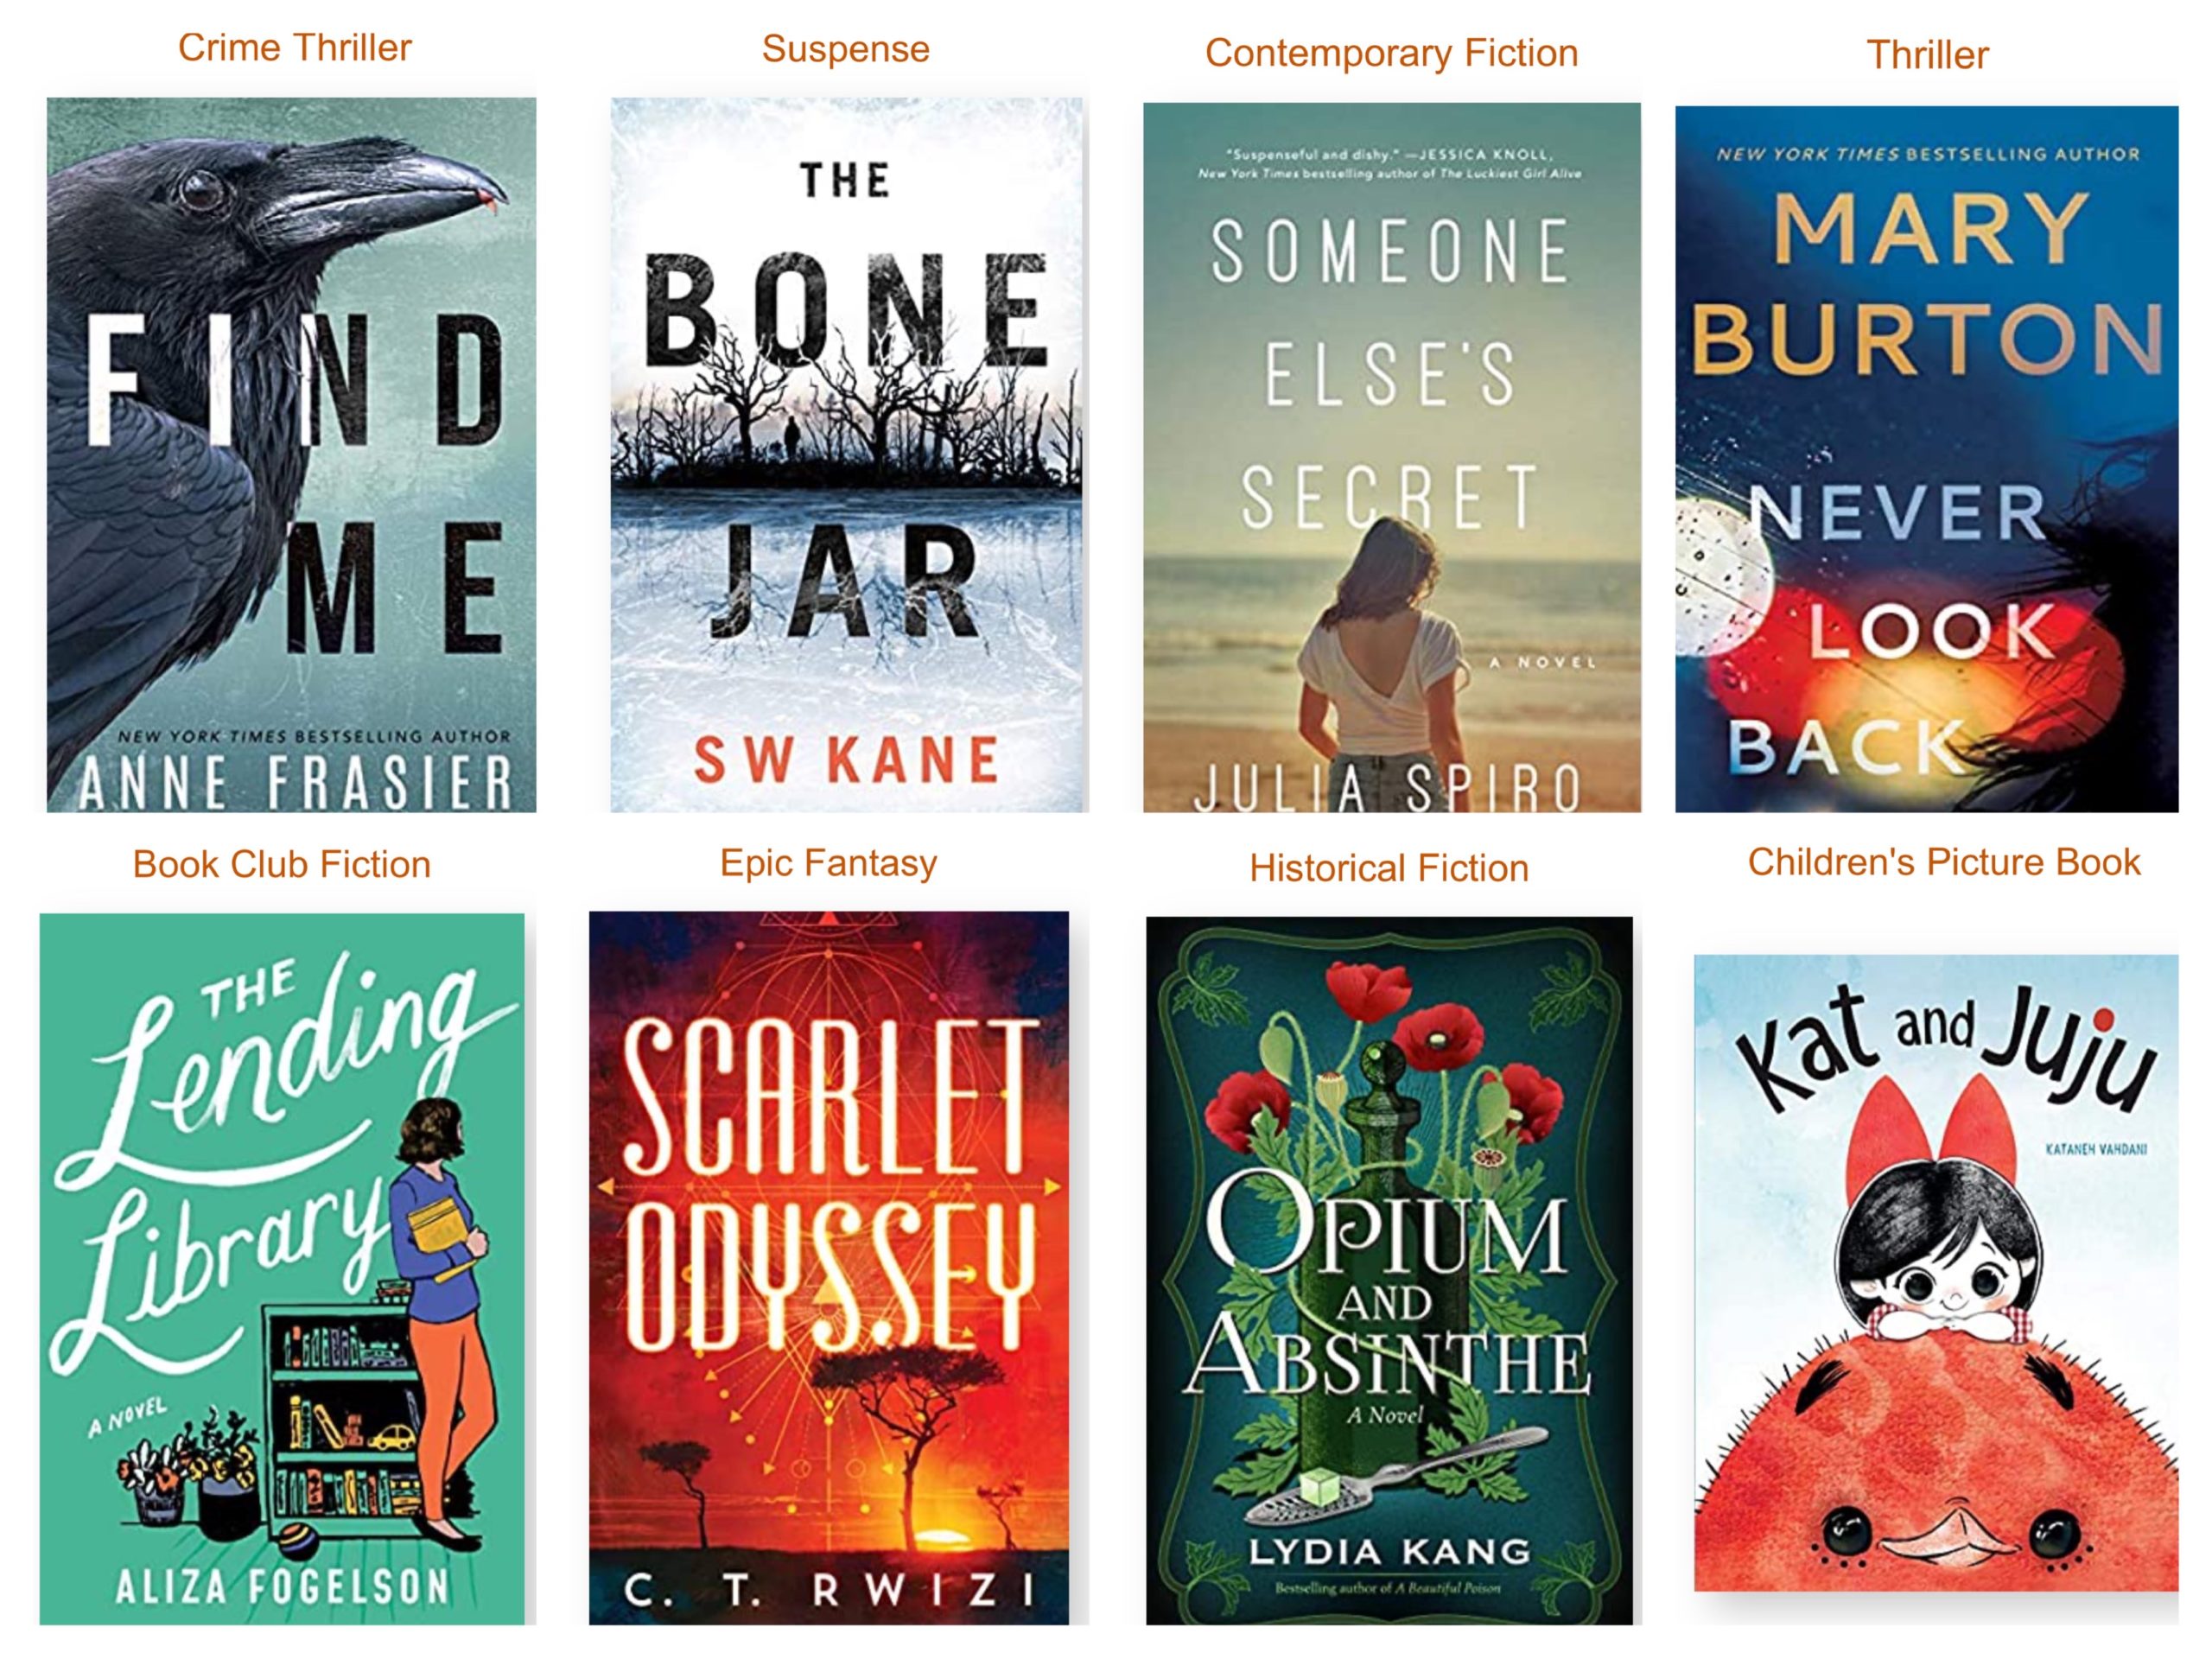 Amazon First Reads for June